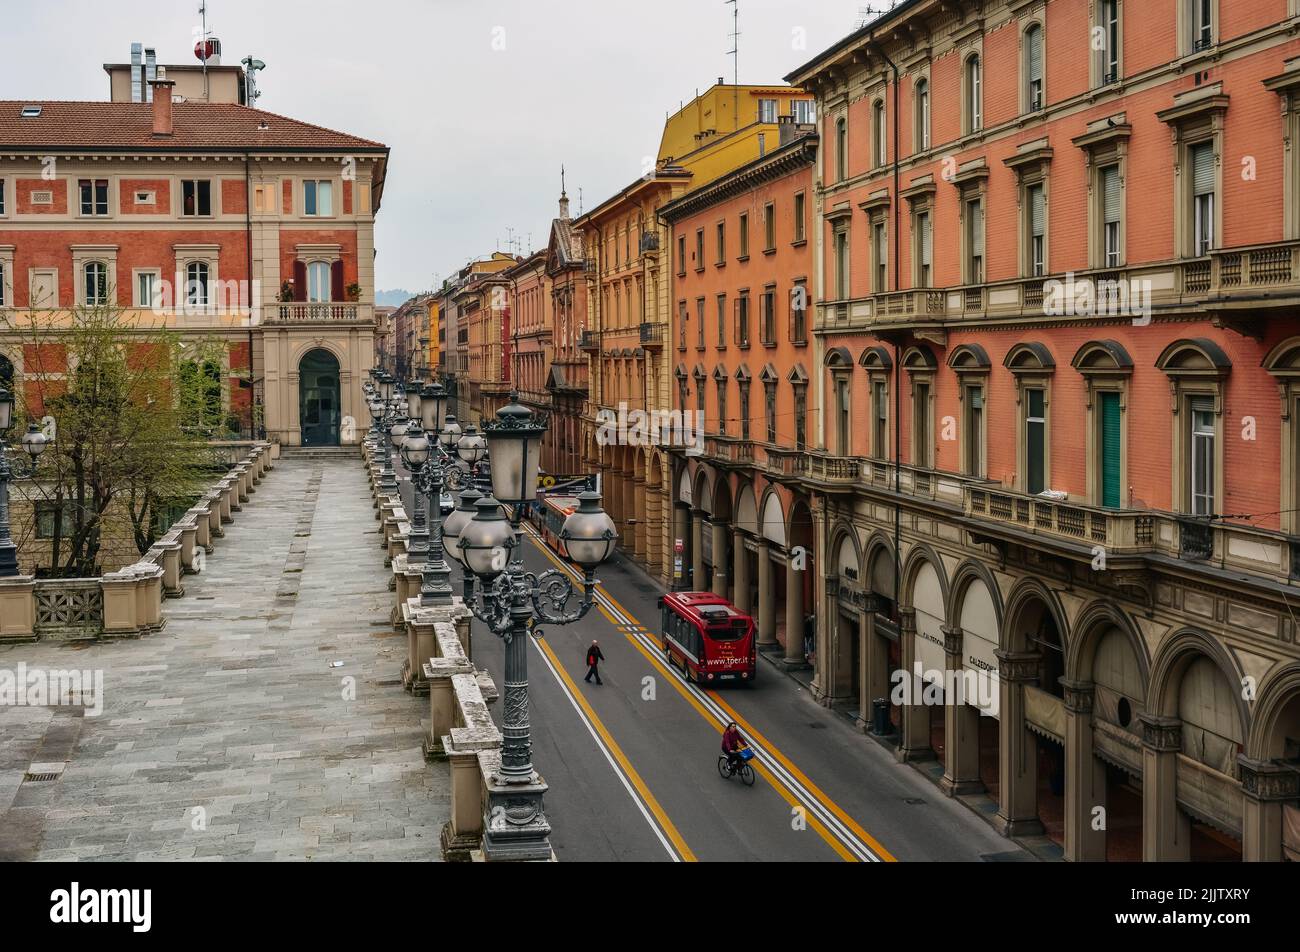 The view to the street with a traffic in Bologna Stock Photo